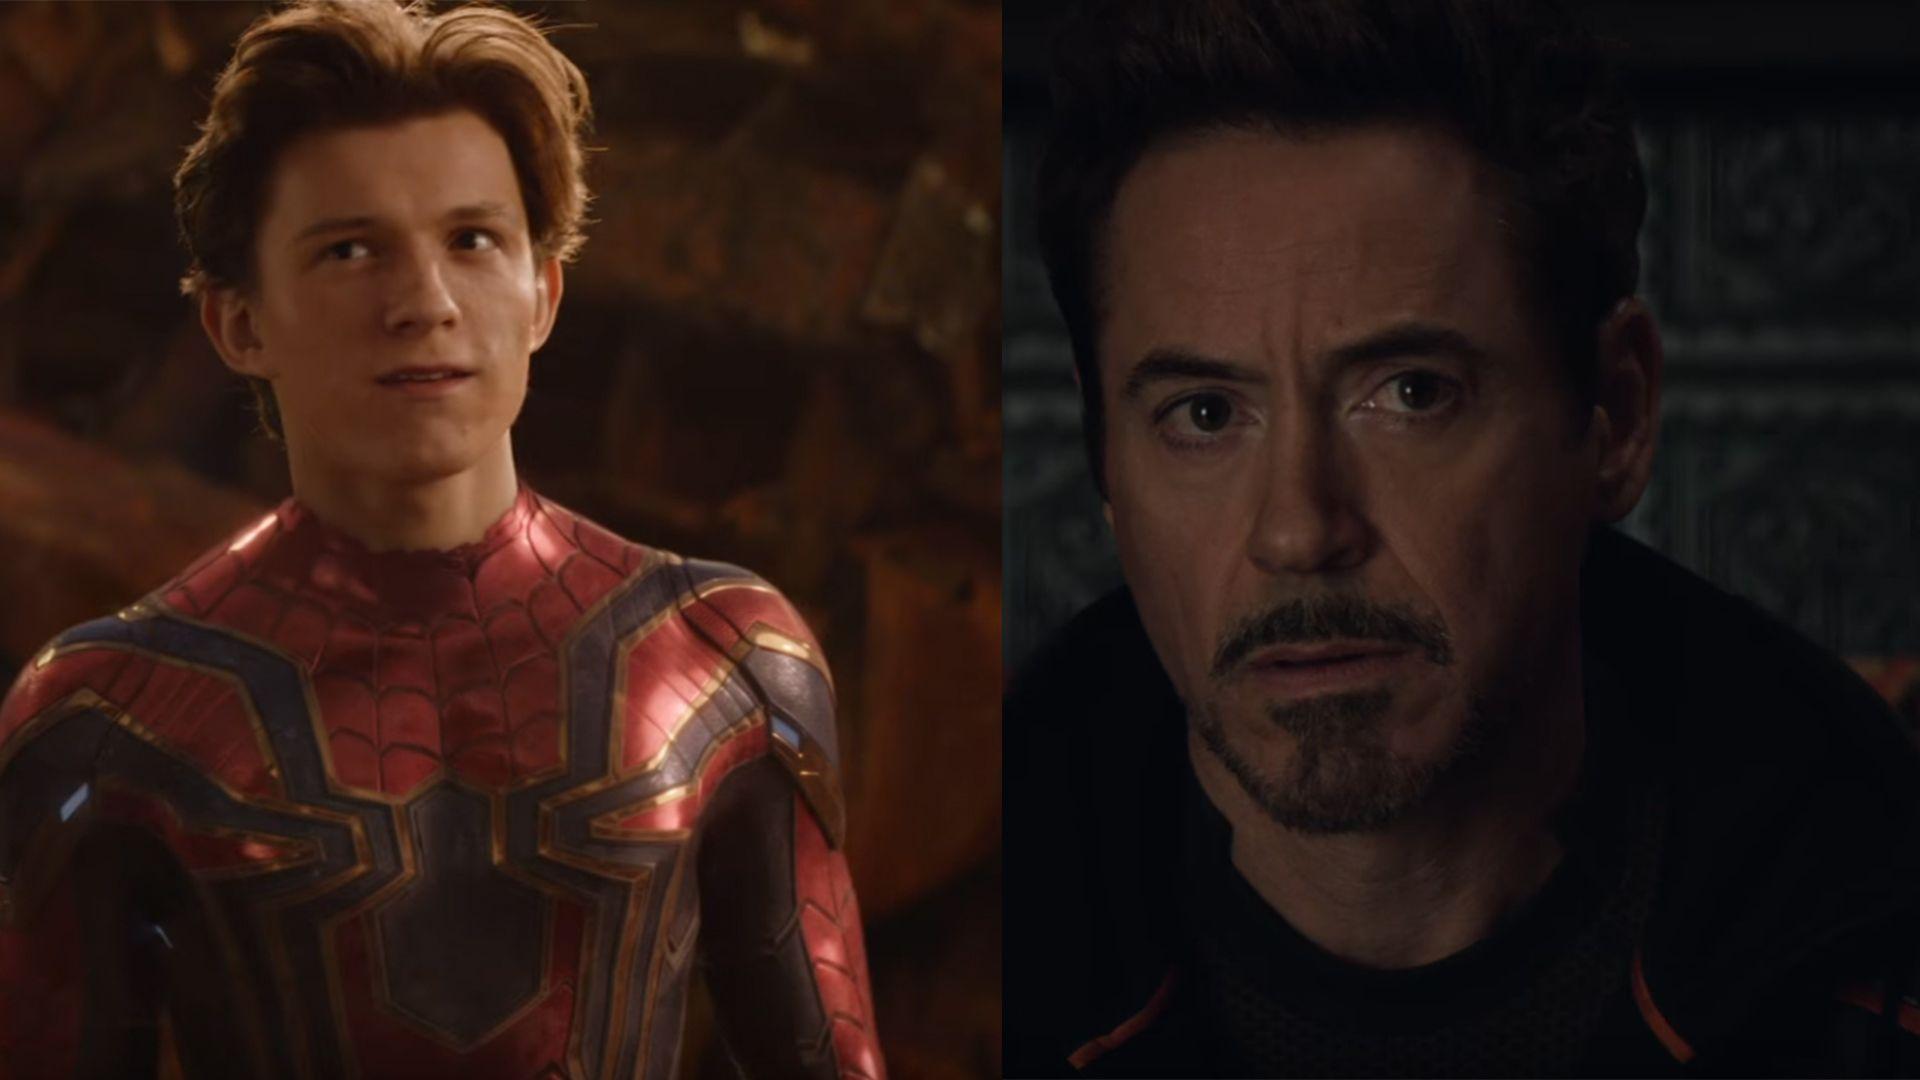 Directors On Spider Man's Bond With Iron Man In Avengers